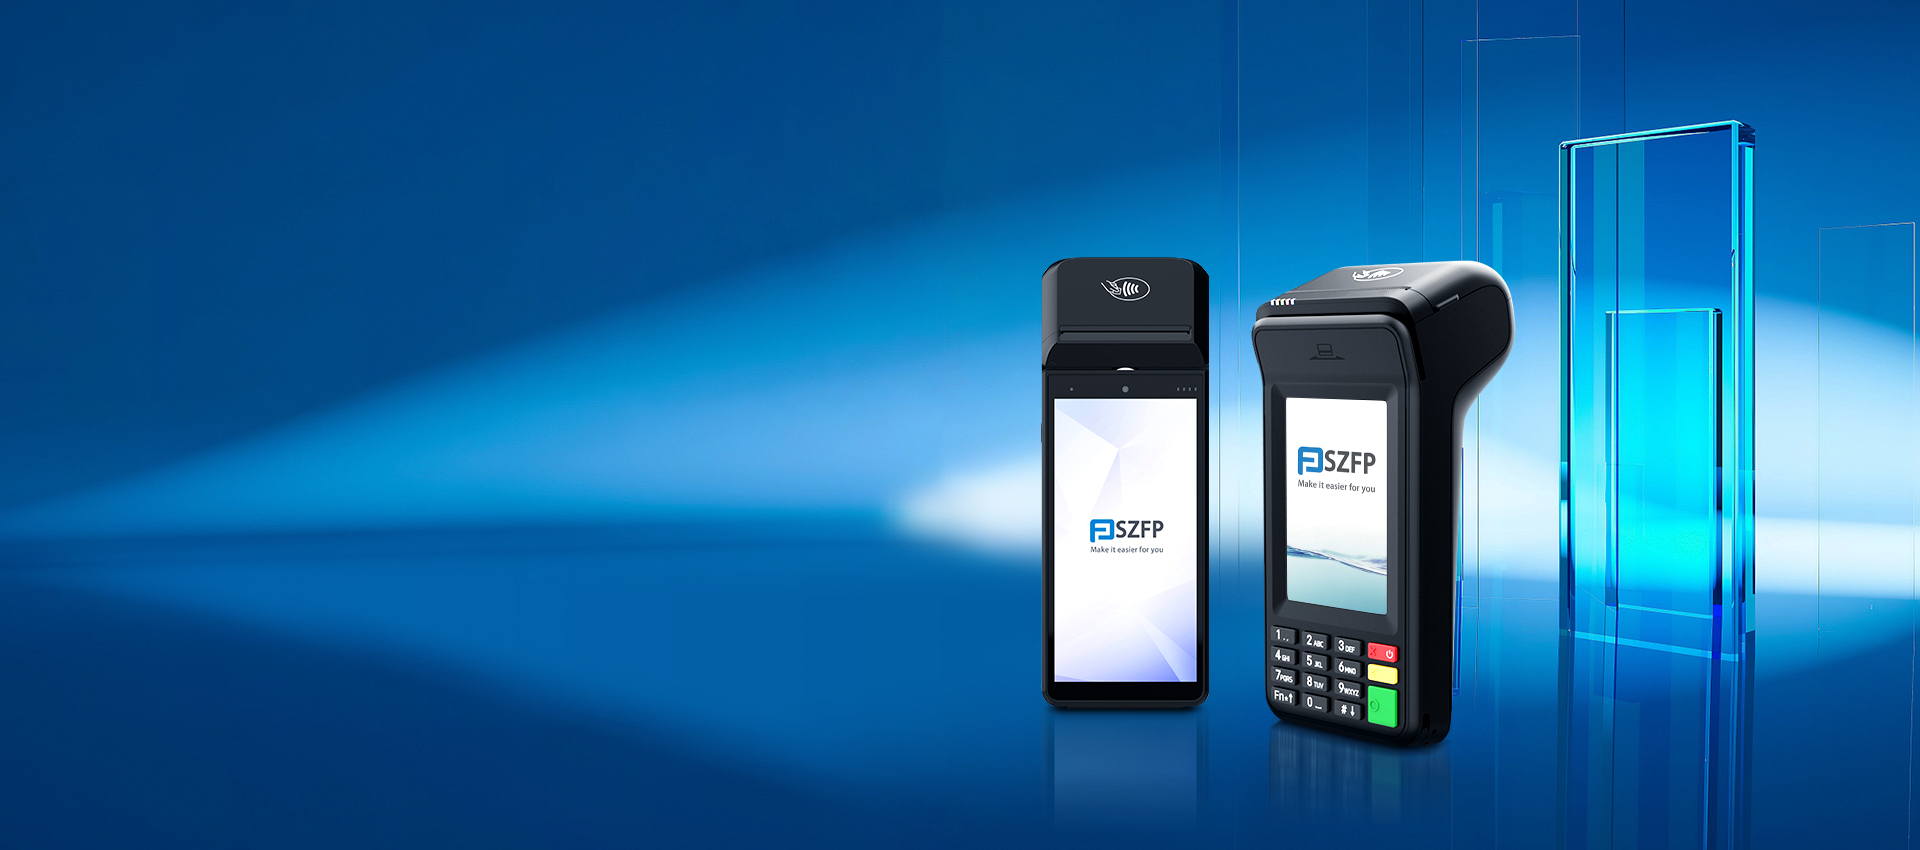 focusing on EFT POS terminals R&D and sales